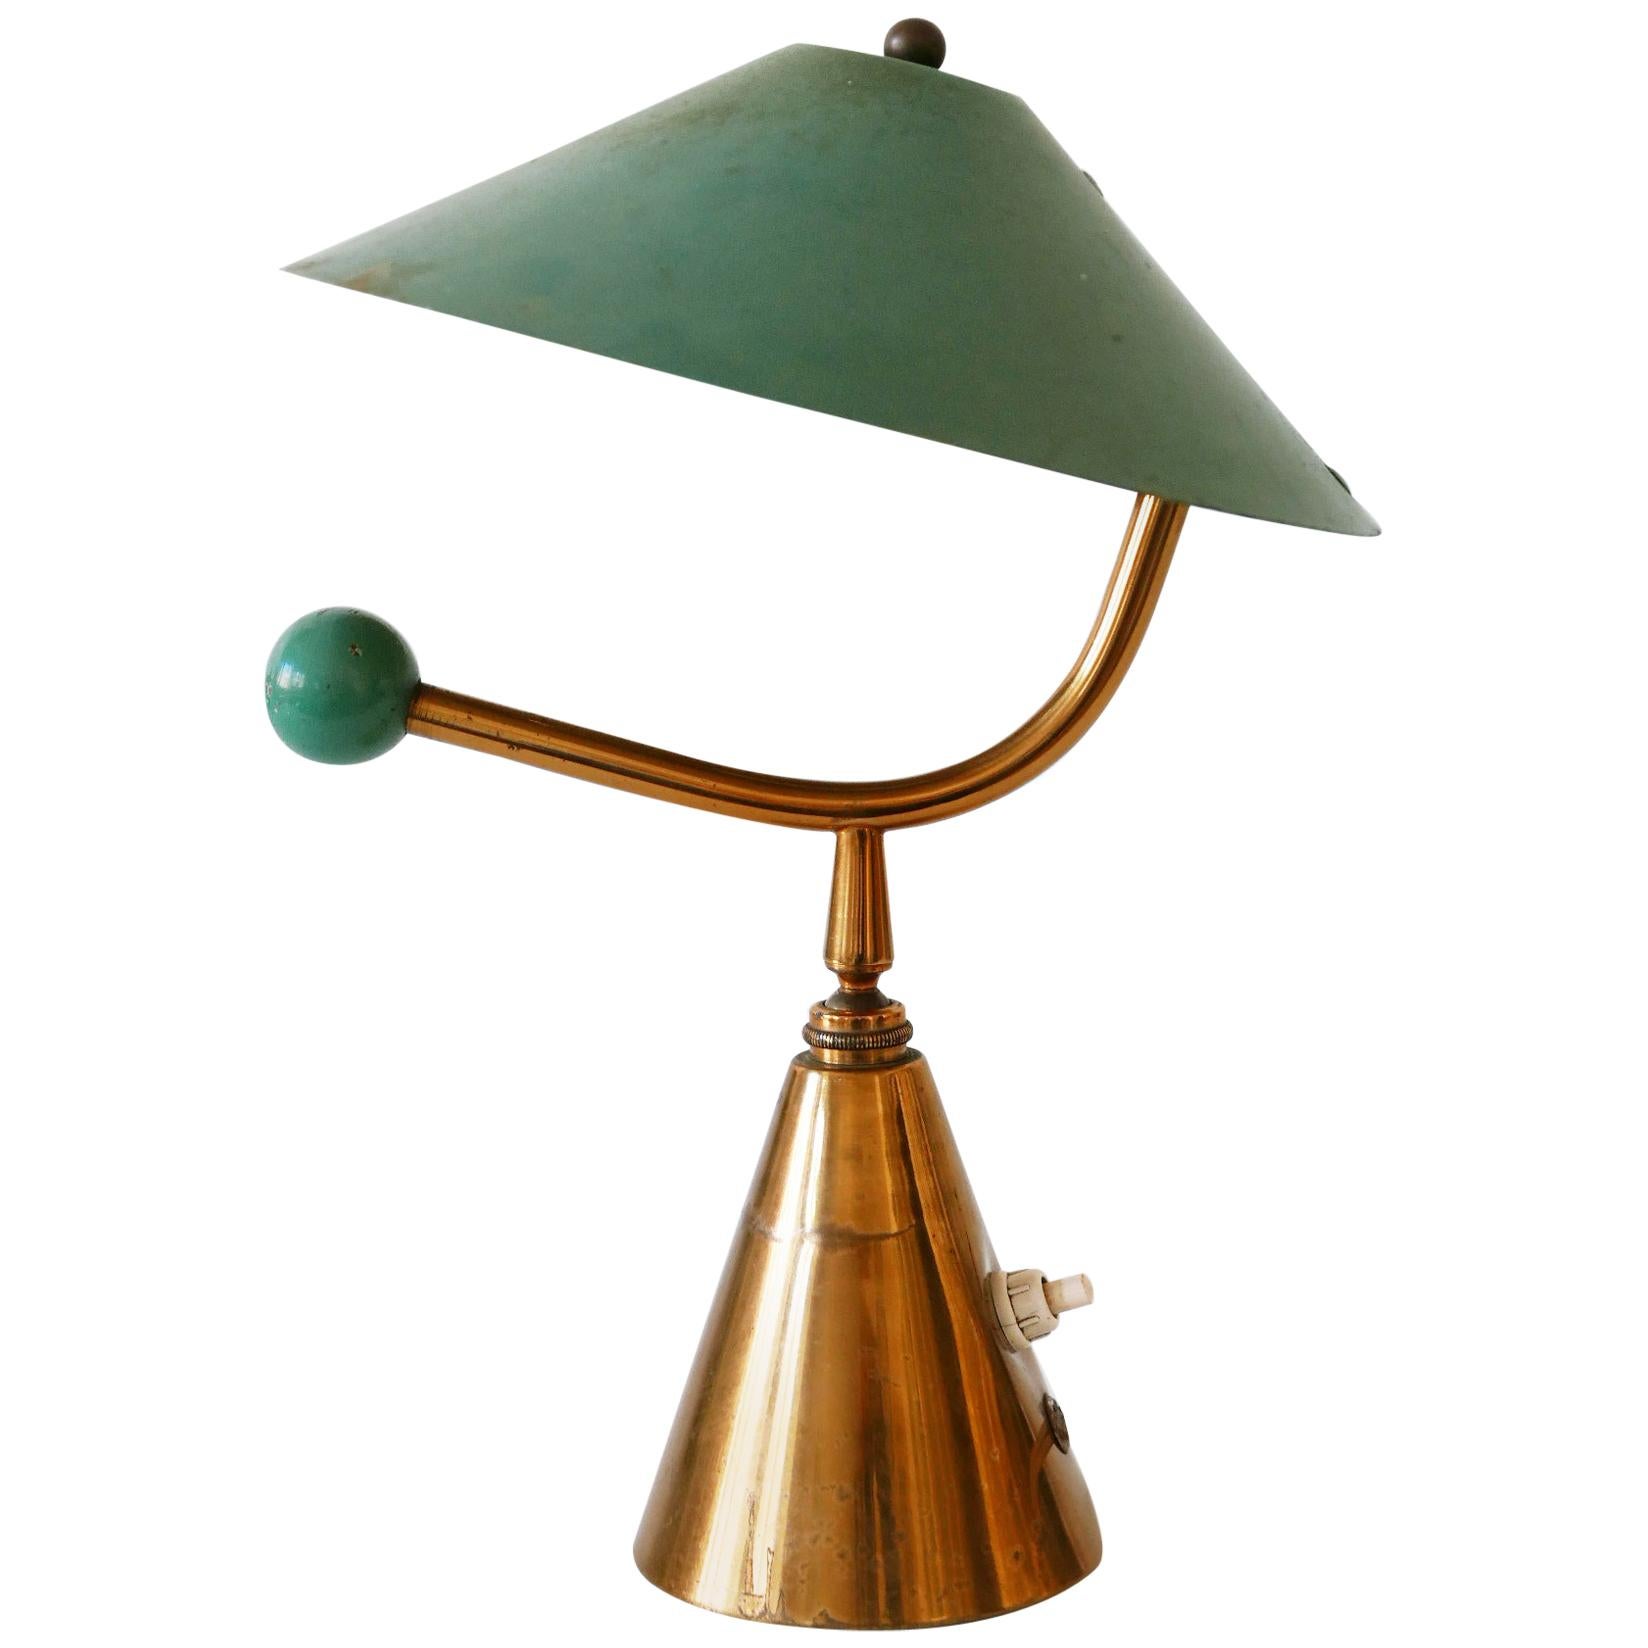 Exceptional Mid-Century Modern Brass Table Lamp, 1950s, France